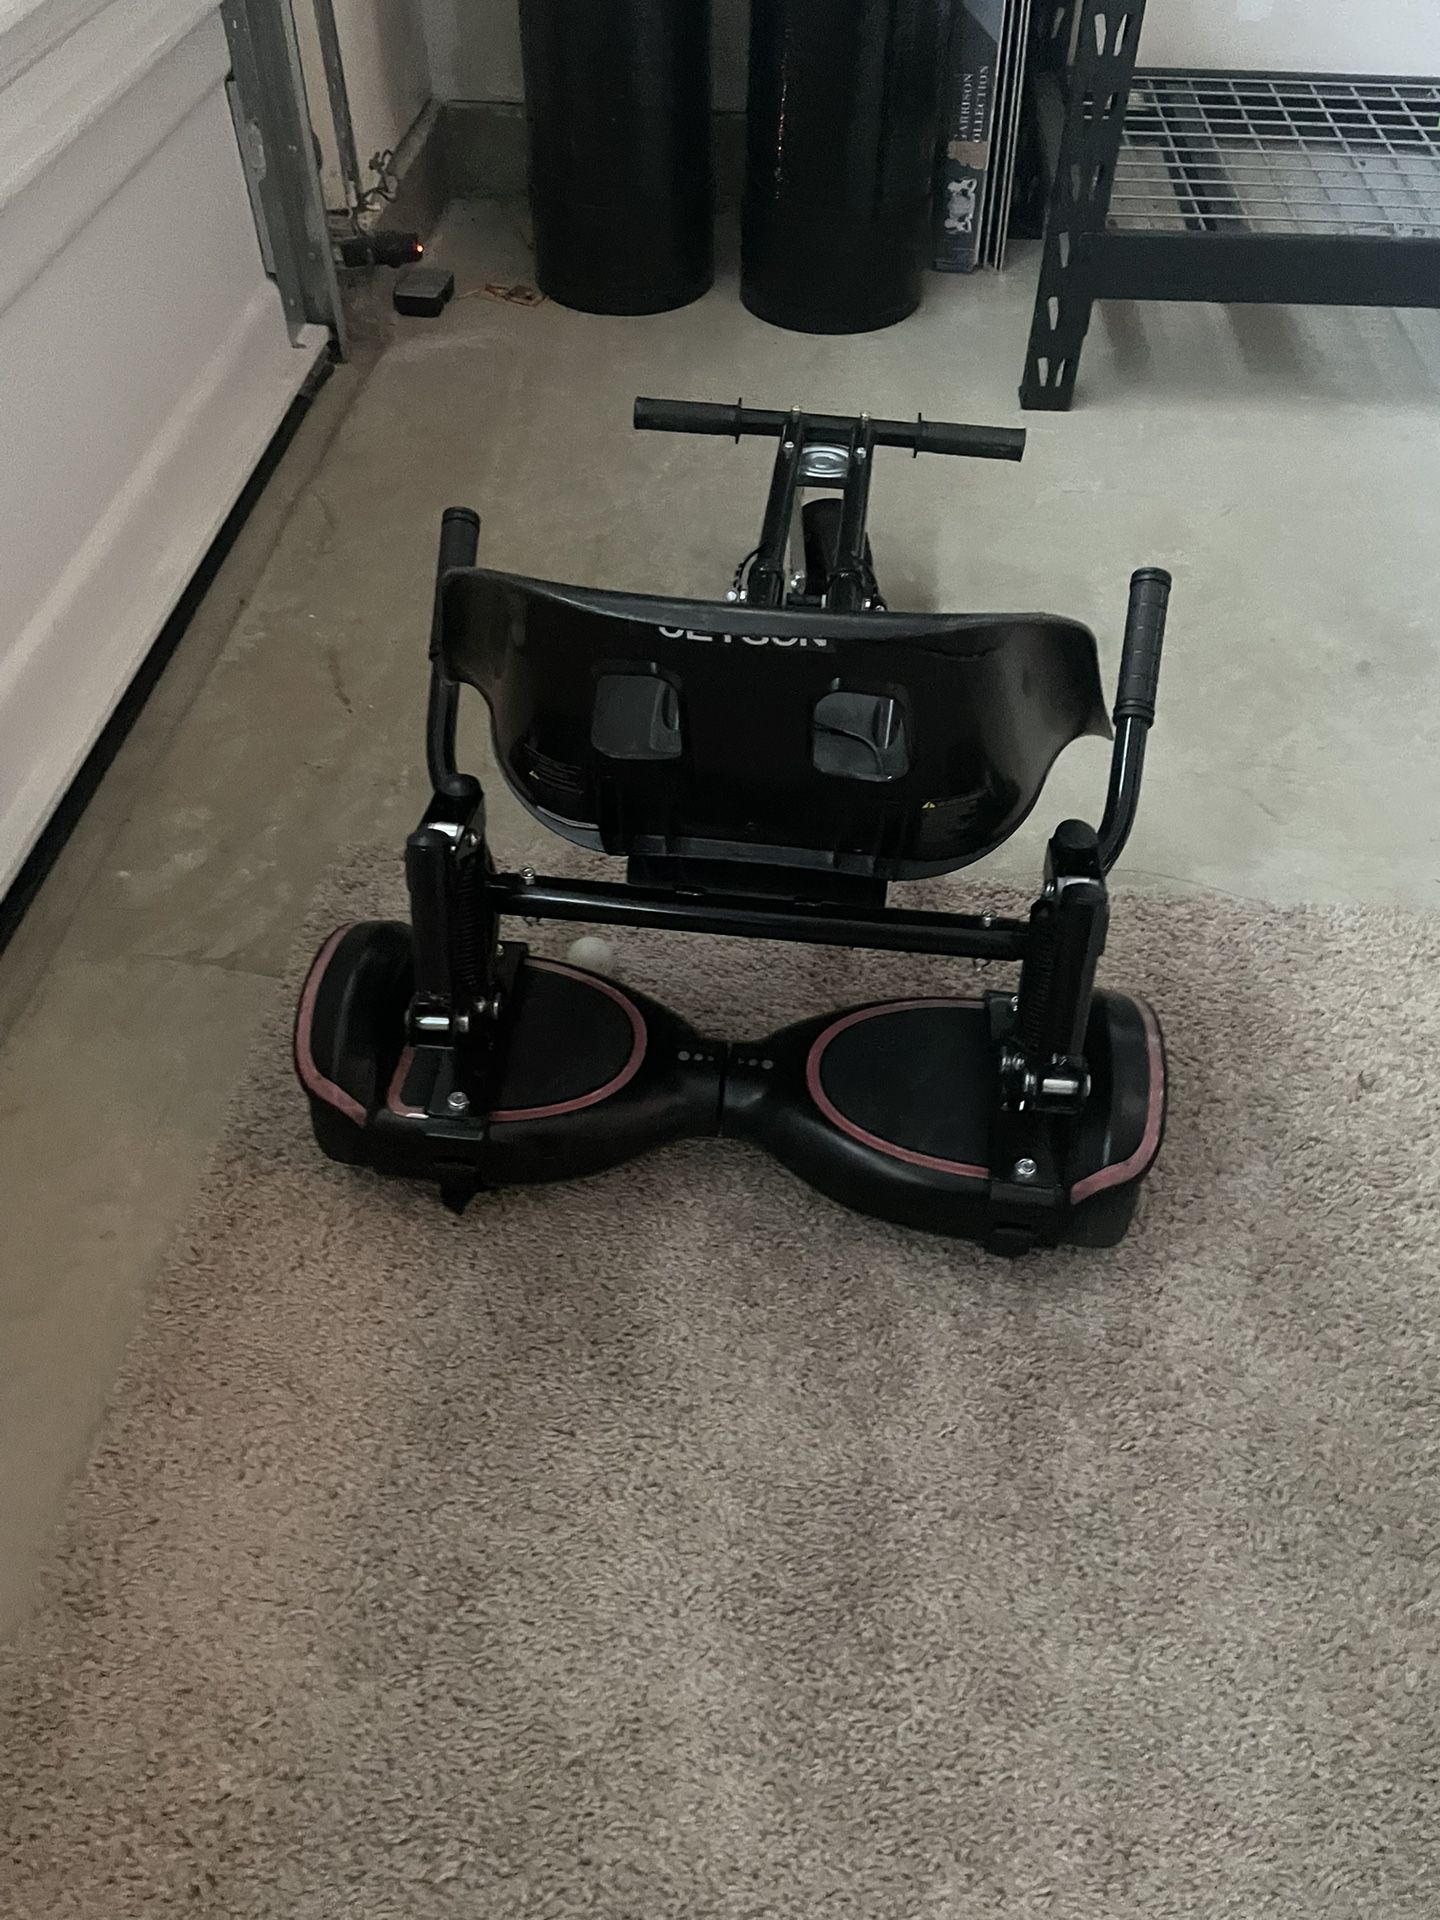 Jetson 2.0 Hover Board With Go kart Attachment